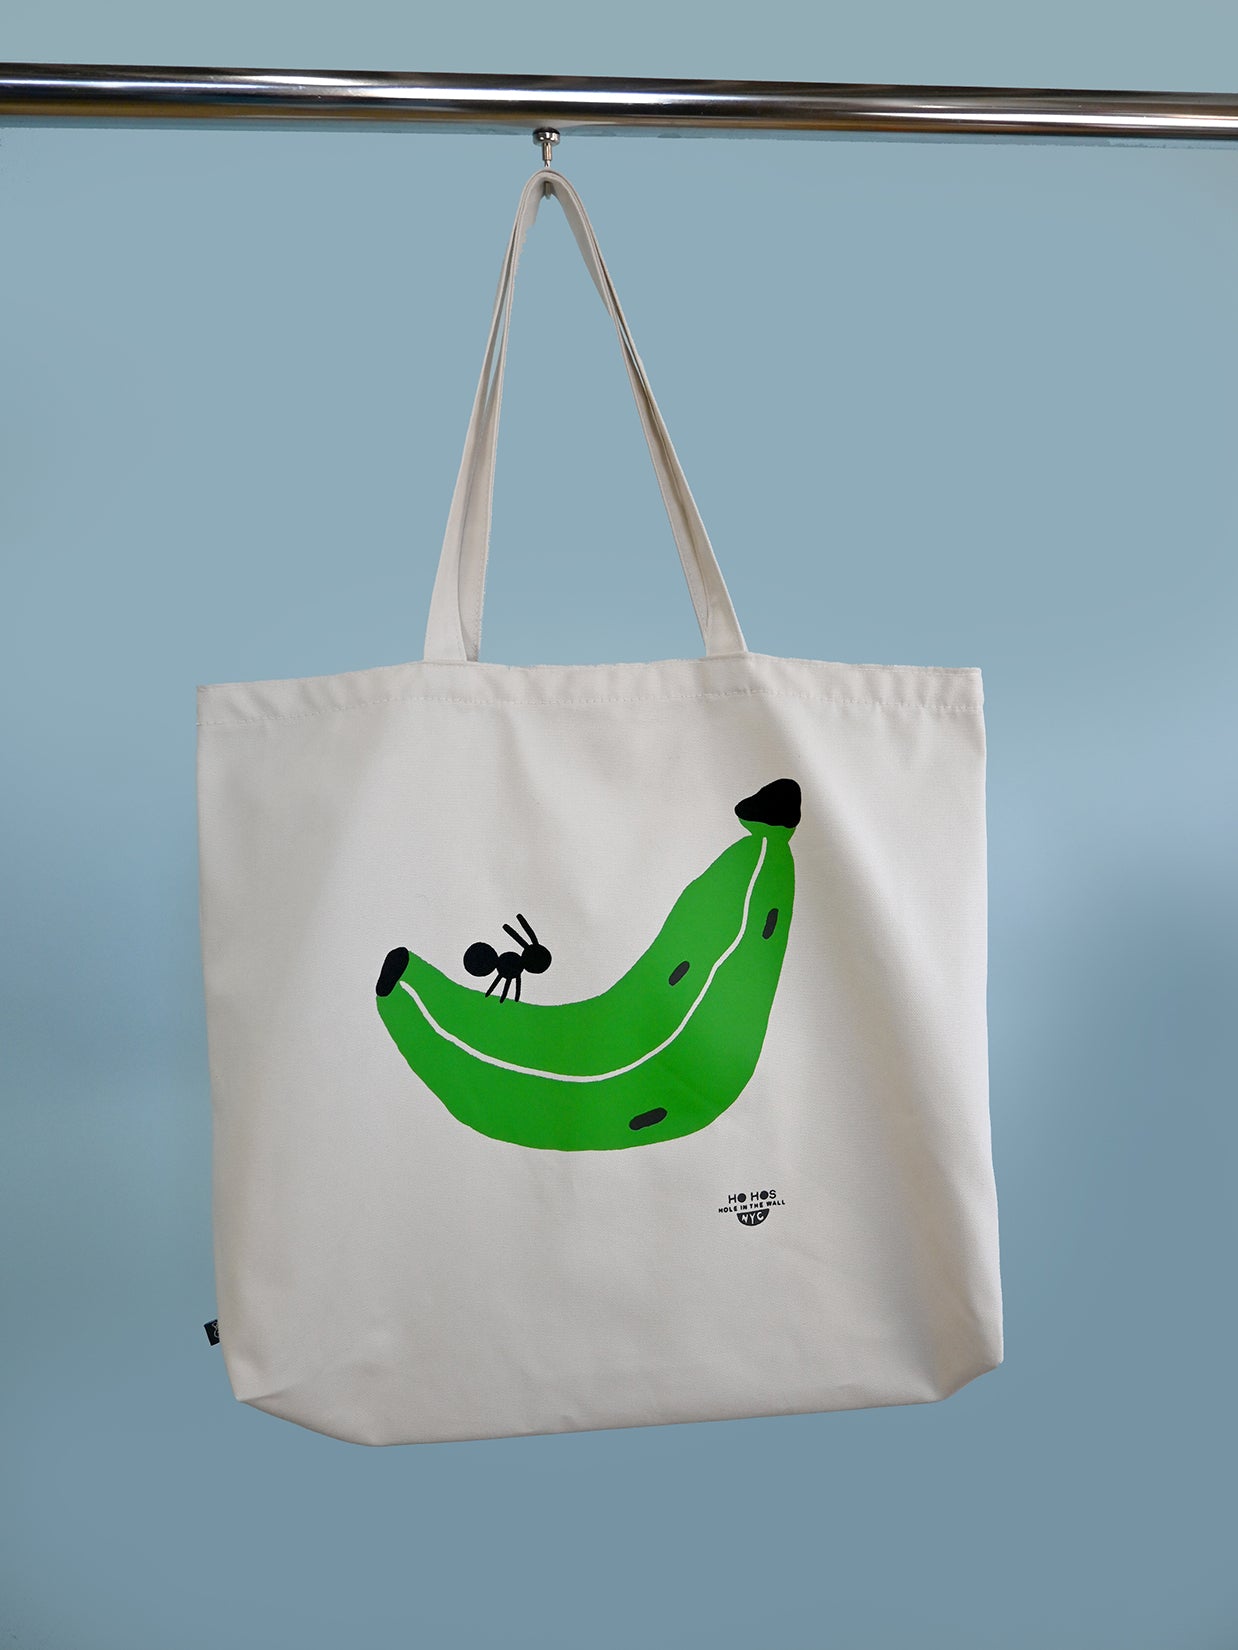 "Plantain" tote bag - Design by HO HOS HOLE IN THE WALL